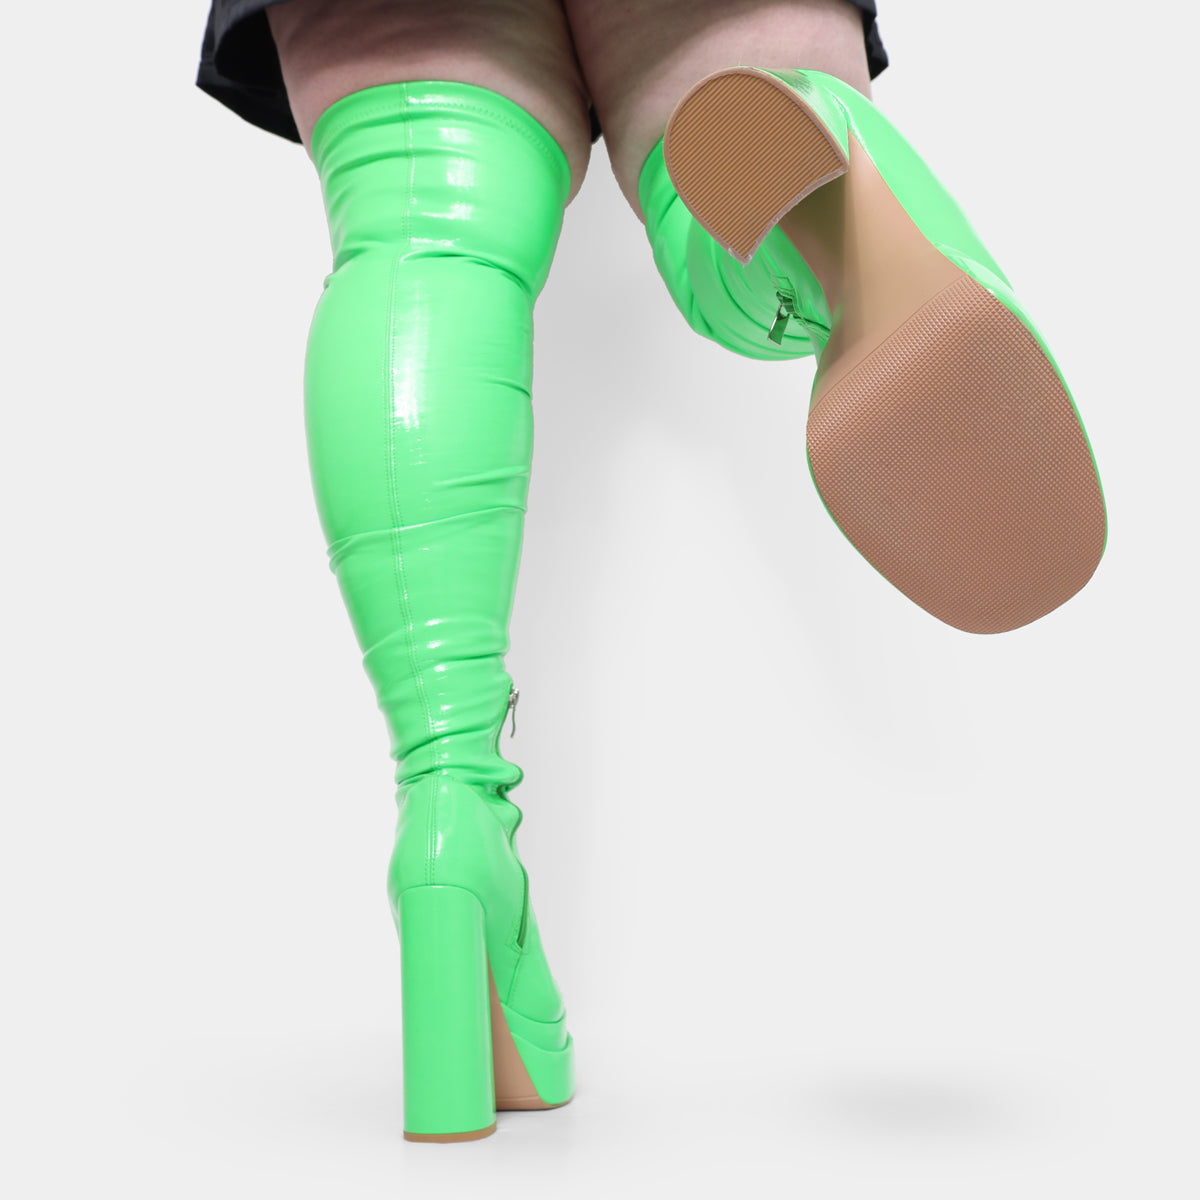 The Redemption Green Stretch Thigh High Boots - Long Boots - KOI Footwear - Green - Sole Detail